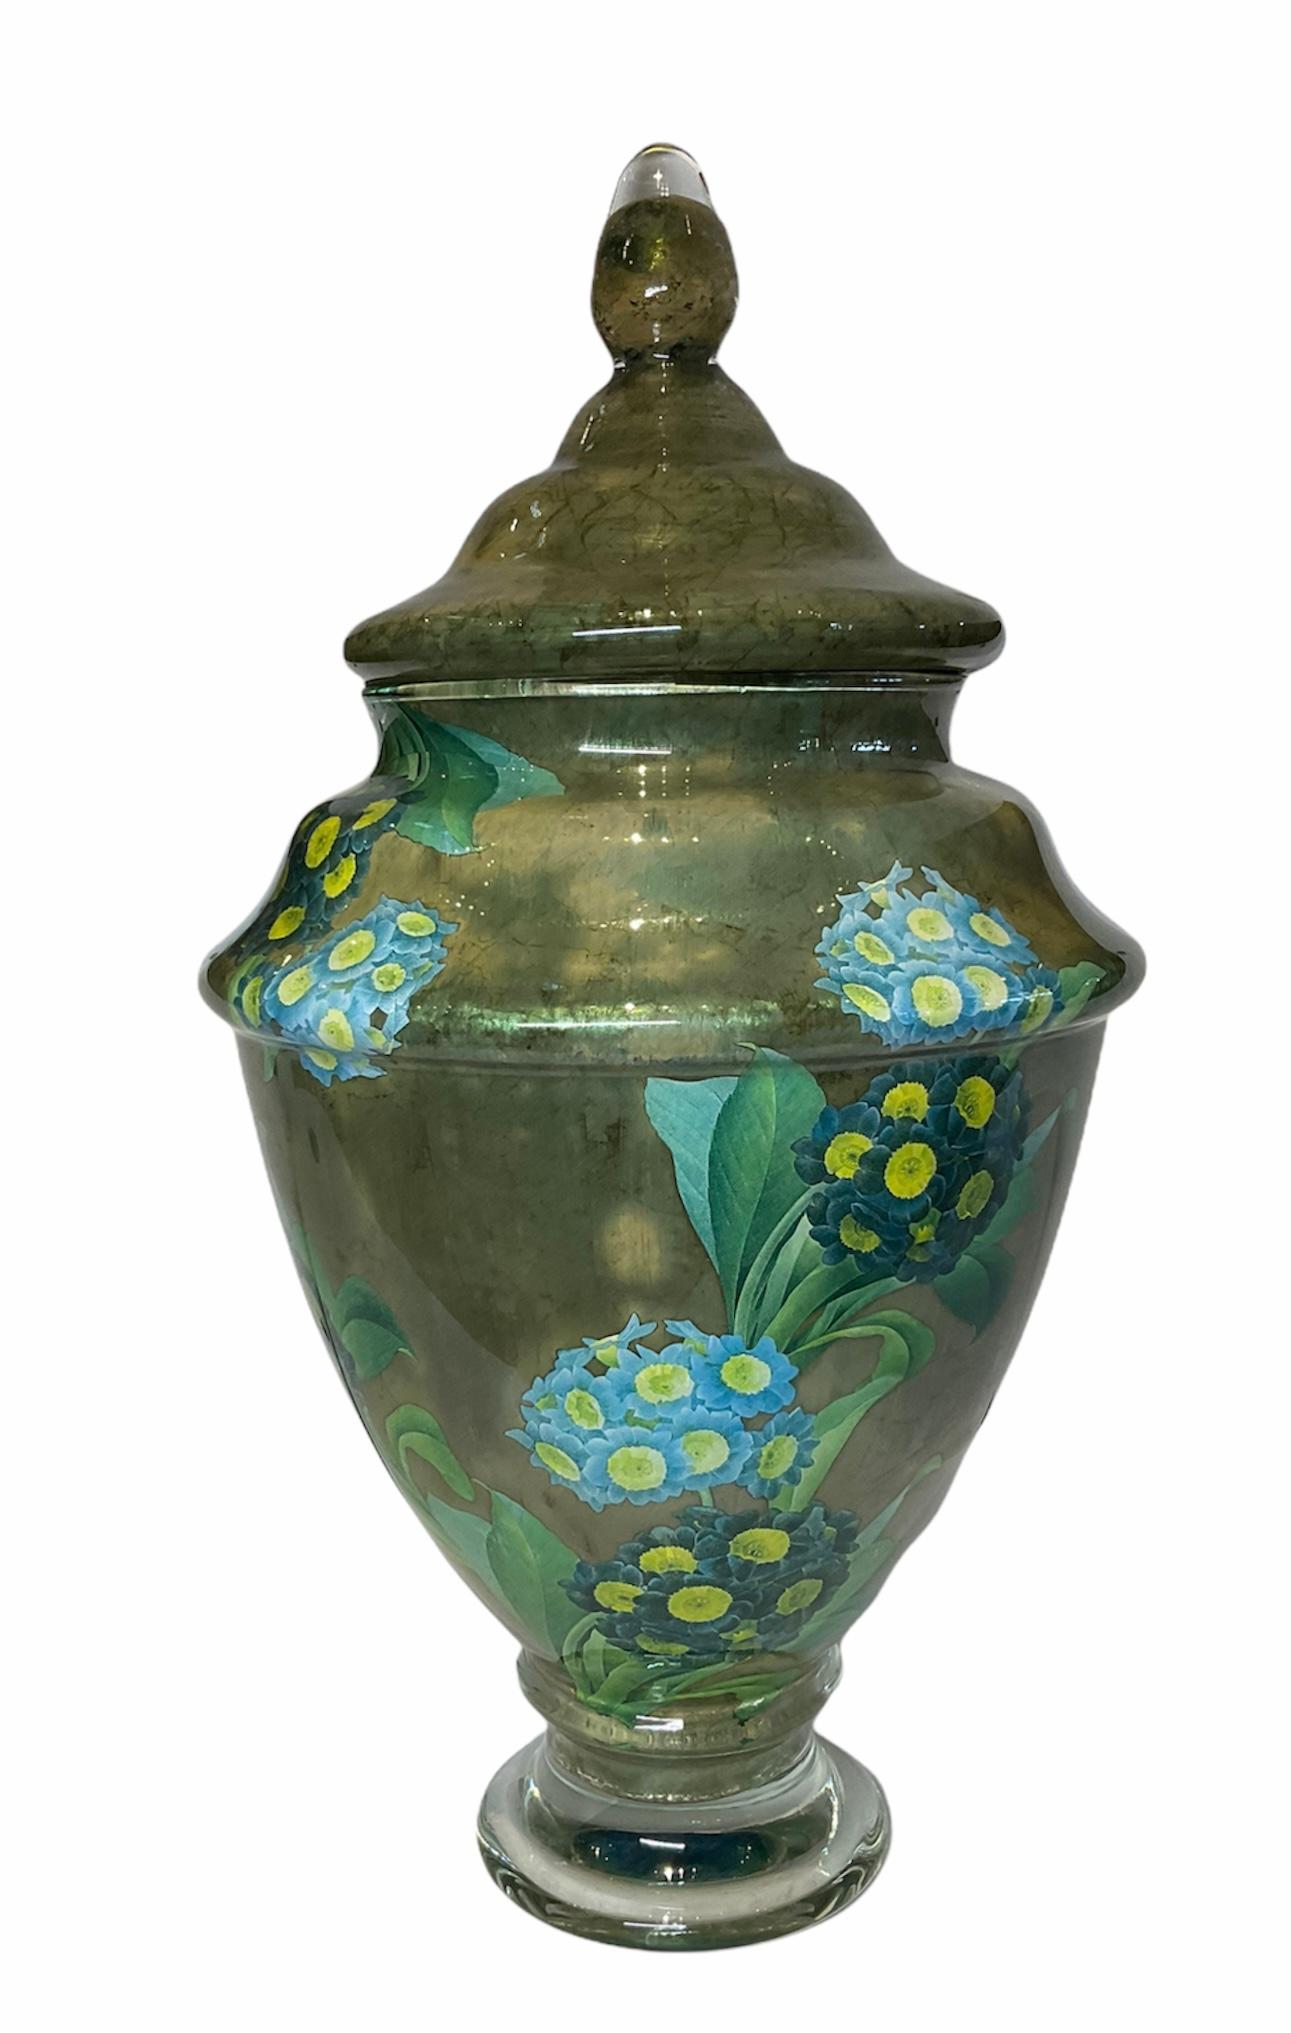 This is a Scott Potter Art Glass lidded urn. It depicts a large urn decoupaged olive green print highlighted with two bouquets of light and dark blue Hydrangeas flowers. This technique was originated in the 18th century and he implemented it with